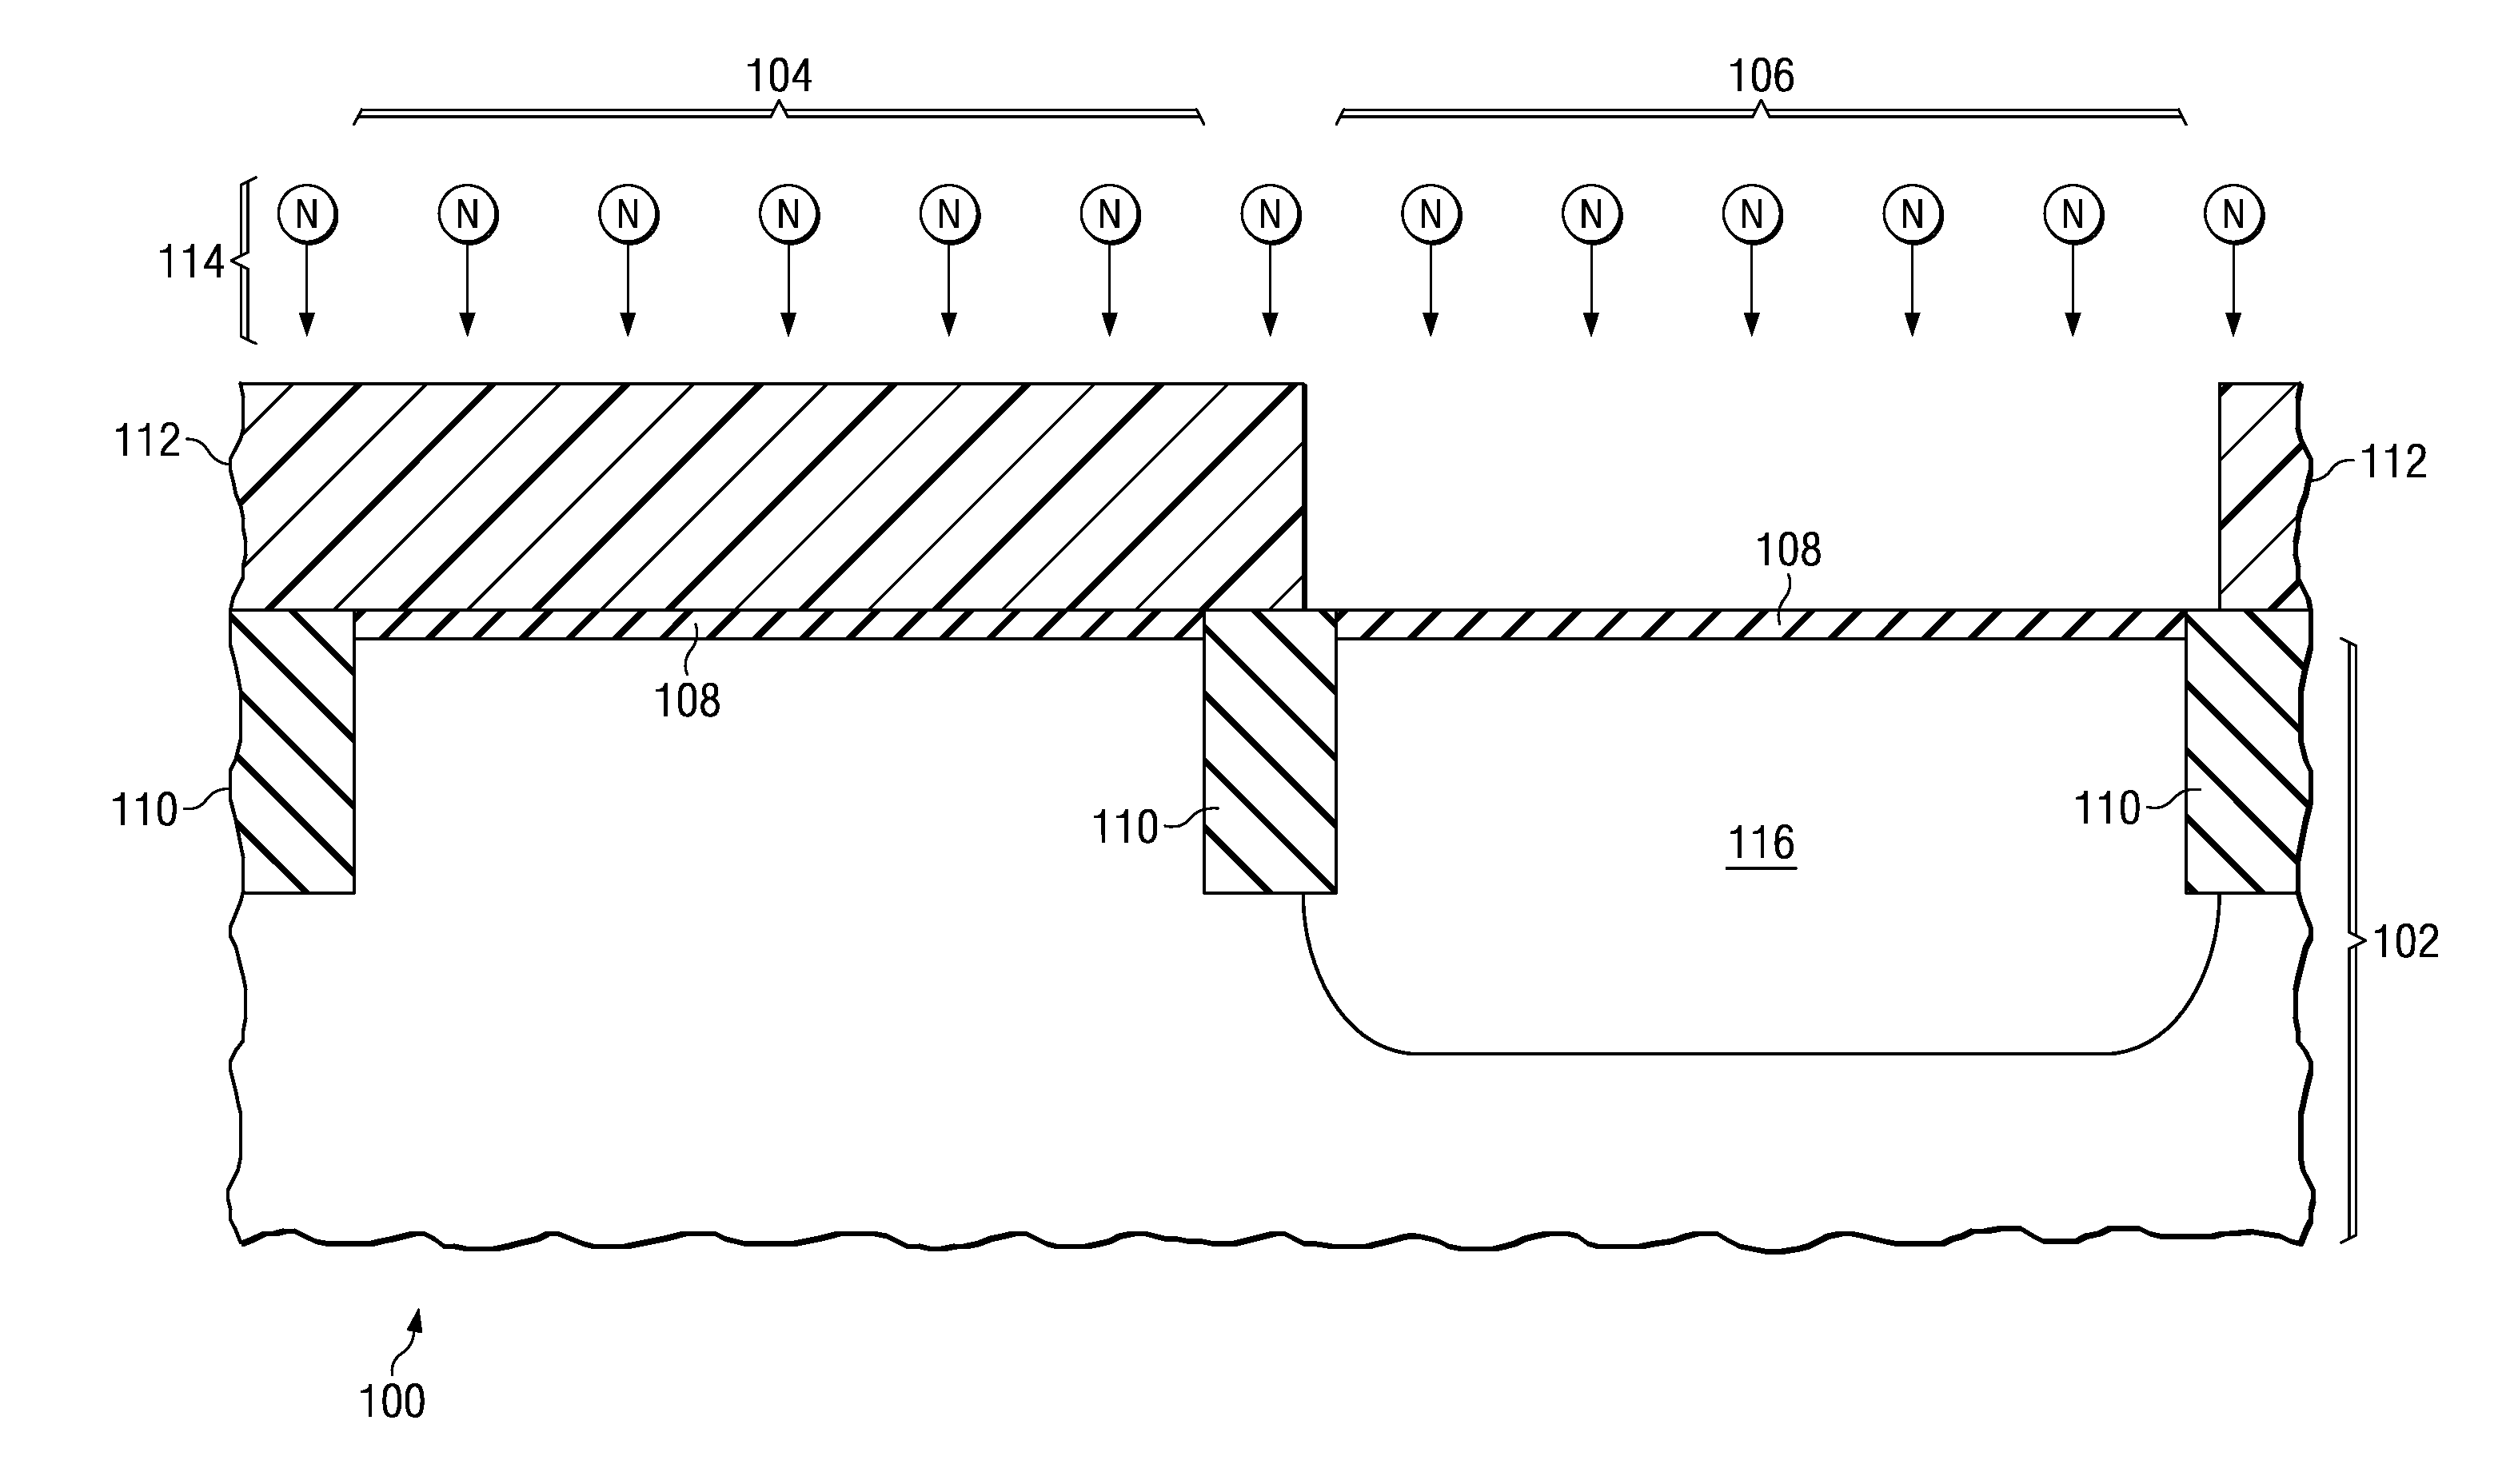 Drain induced barrier lowering with Anti-punch-through implant